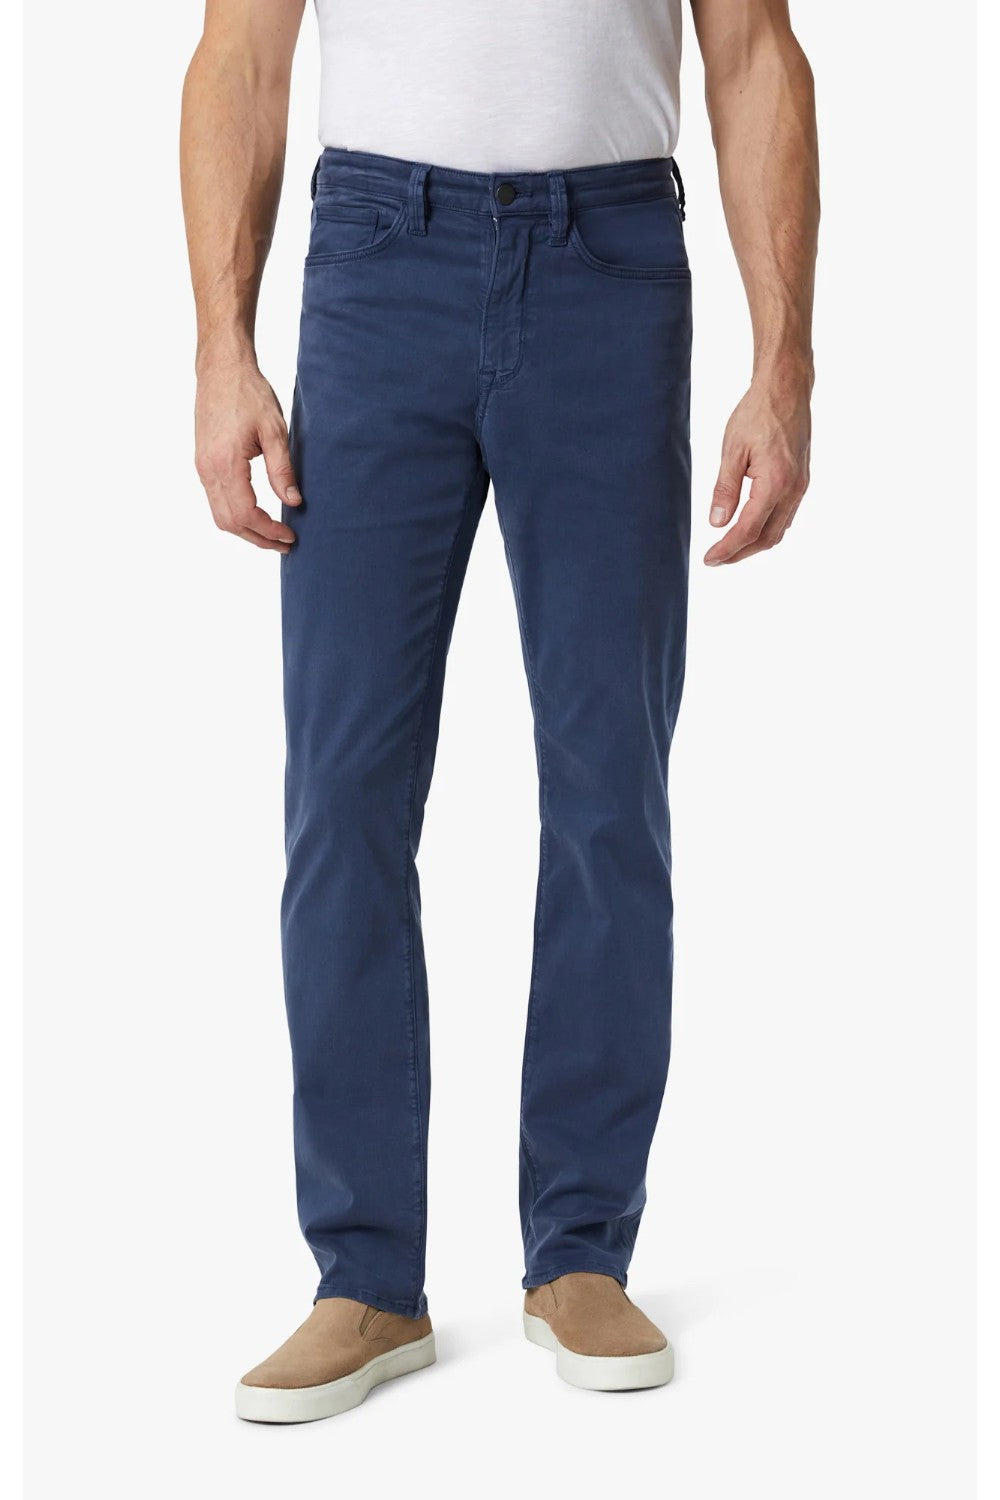 Designed For Comfort A dark blue wash and 5-pocket style gives this pant the appearance of refined denim, but these are made from super soft twill. We designed them with a higher rise and a relaxed straight leg for a balanced and timeless style.